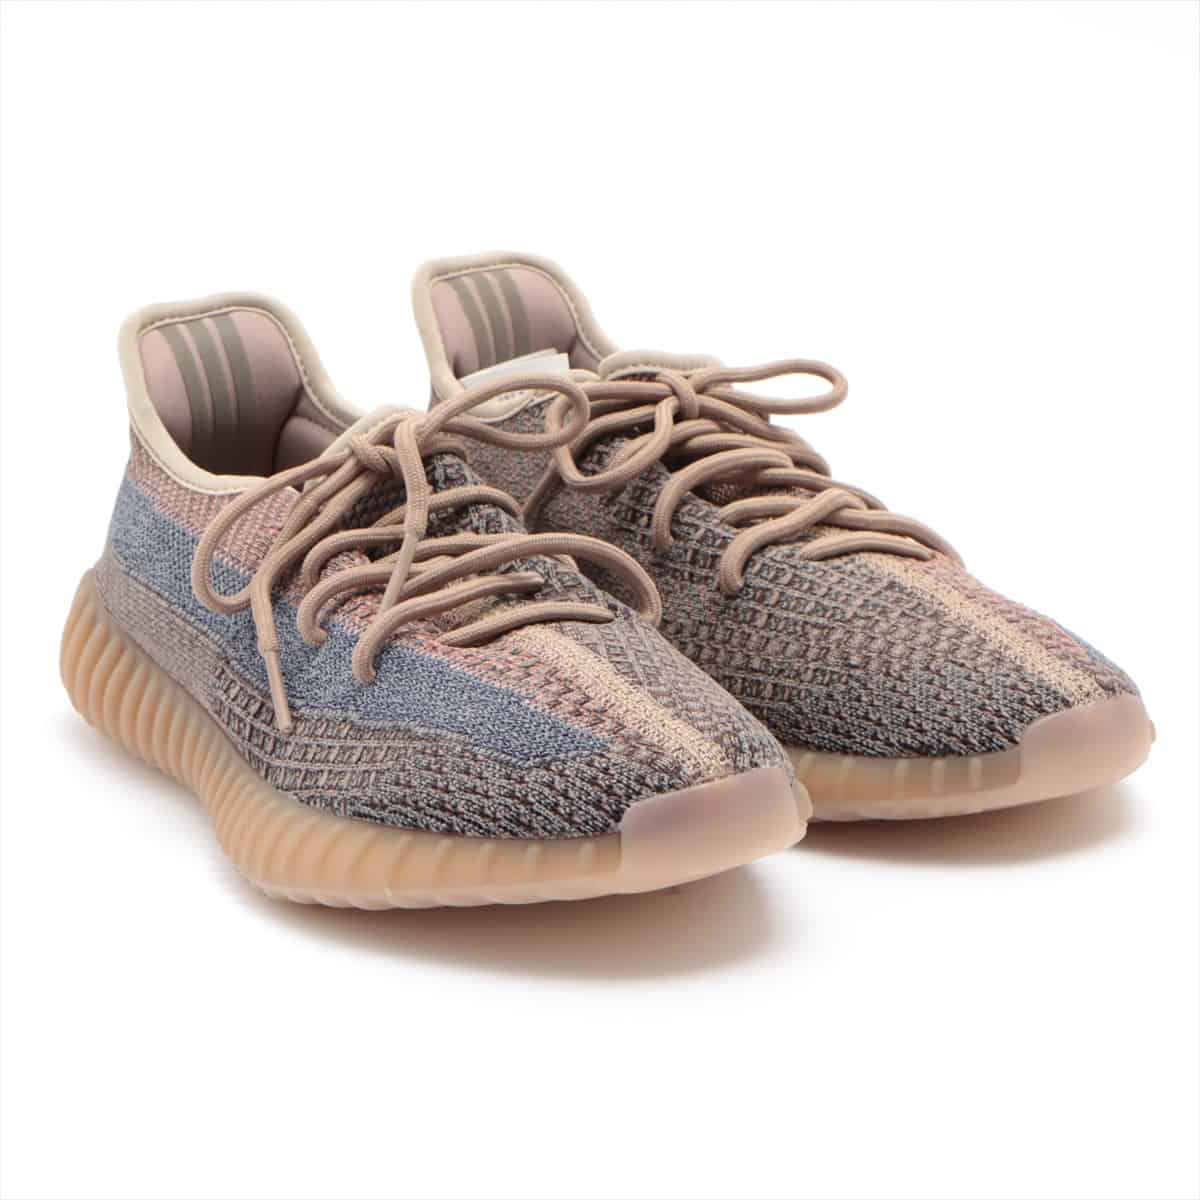 adidas x Kanye West YEEZY BOOST 350 V2 Fabric Sneakers 27.5㎝ Men's pink purple H02795 fades